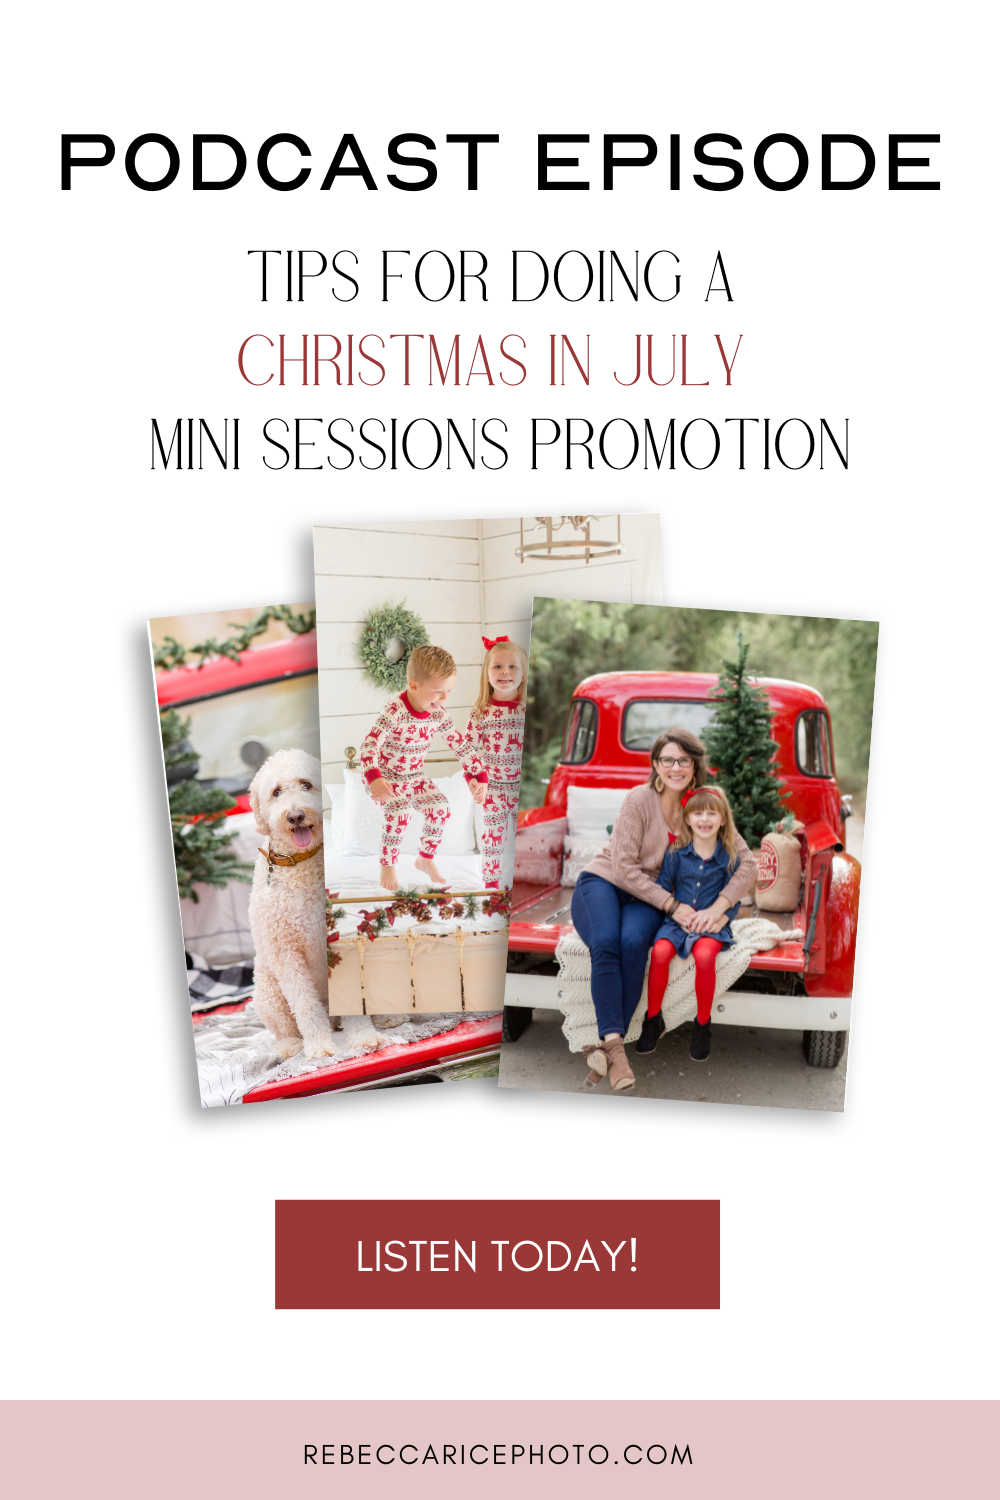 Tips for doing a Christmas in July Mini Sessions Promotion!  Click to listen NOW!
-rebeccaricephoto.com